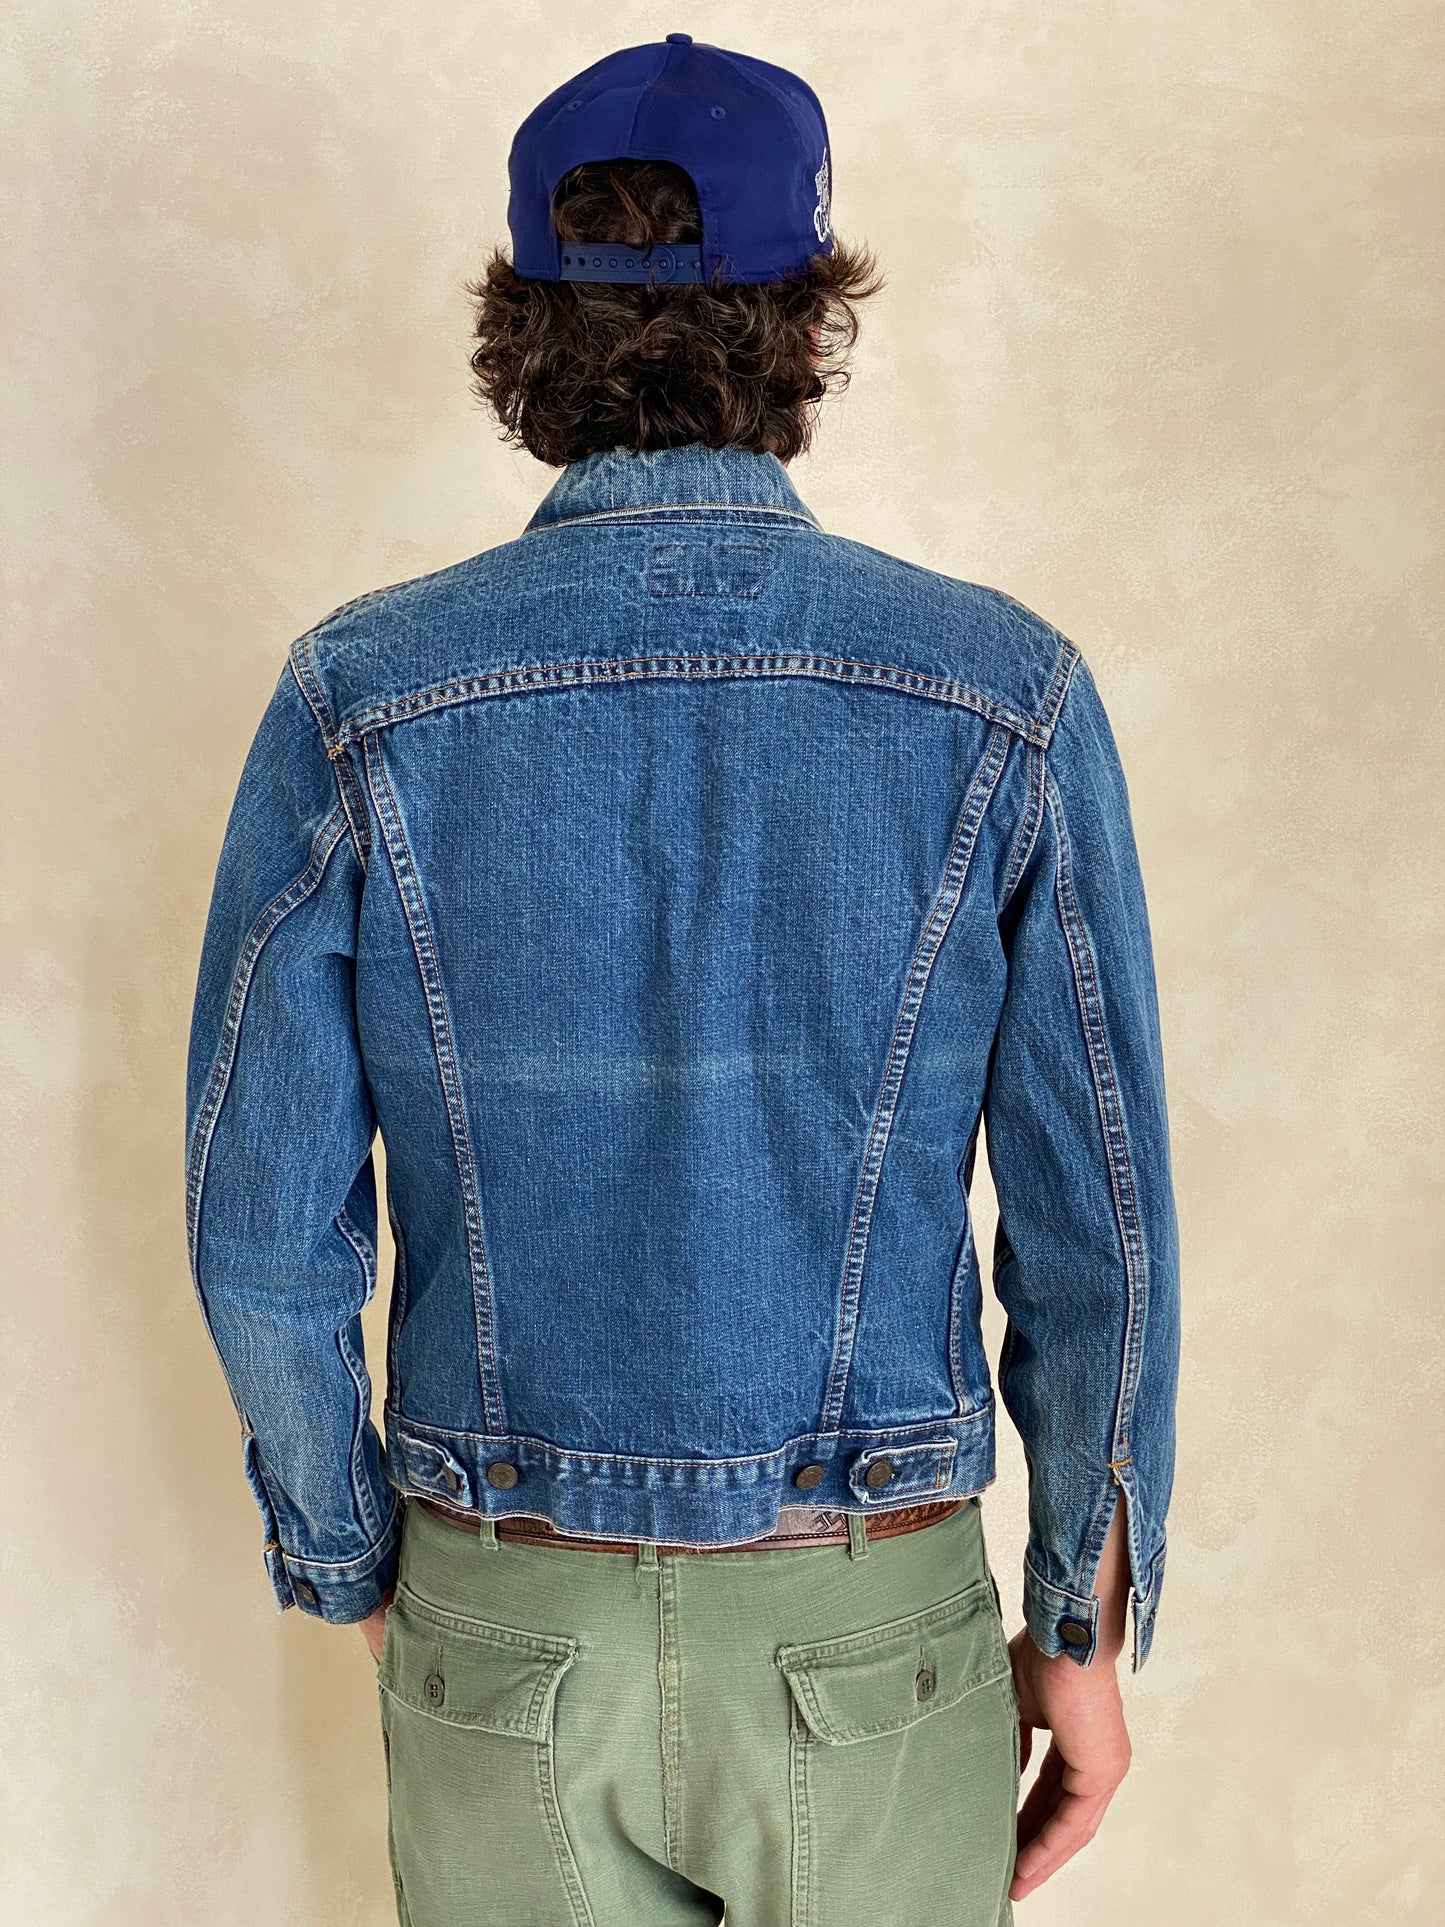 Vintage 1971 Levis jacket, size 36/38US, with single stitch detailing, made in the USA.